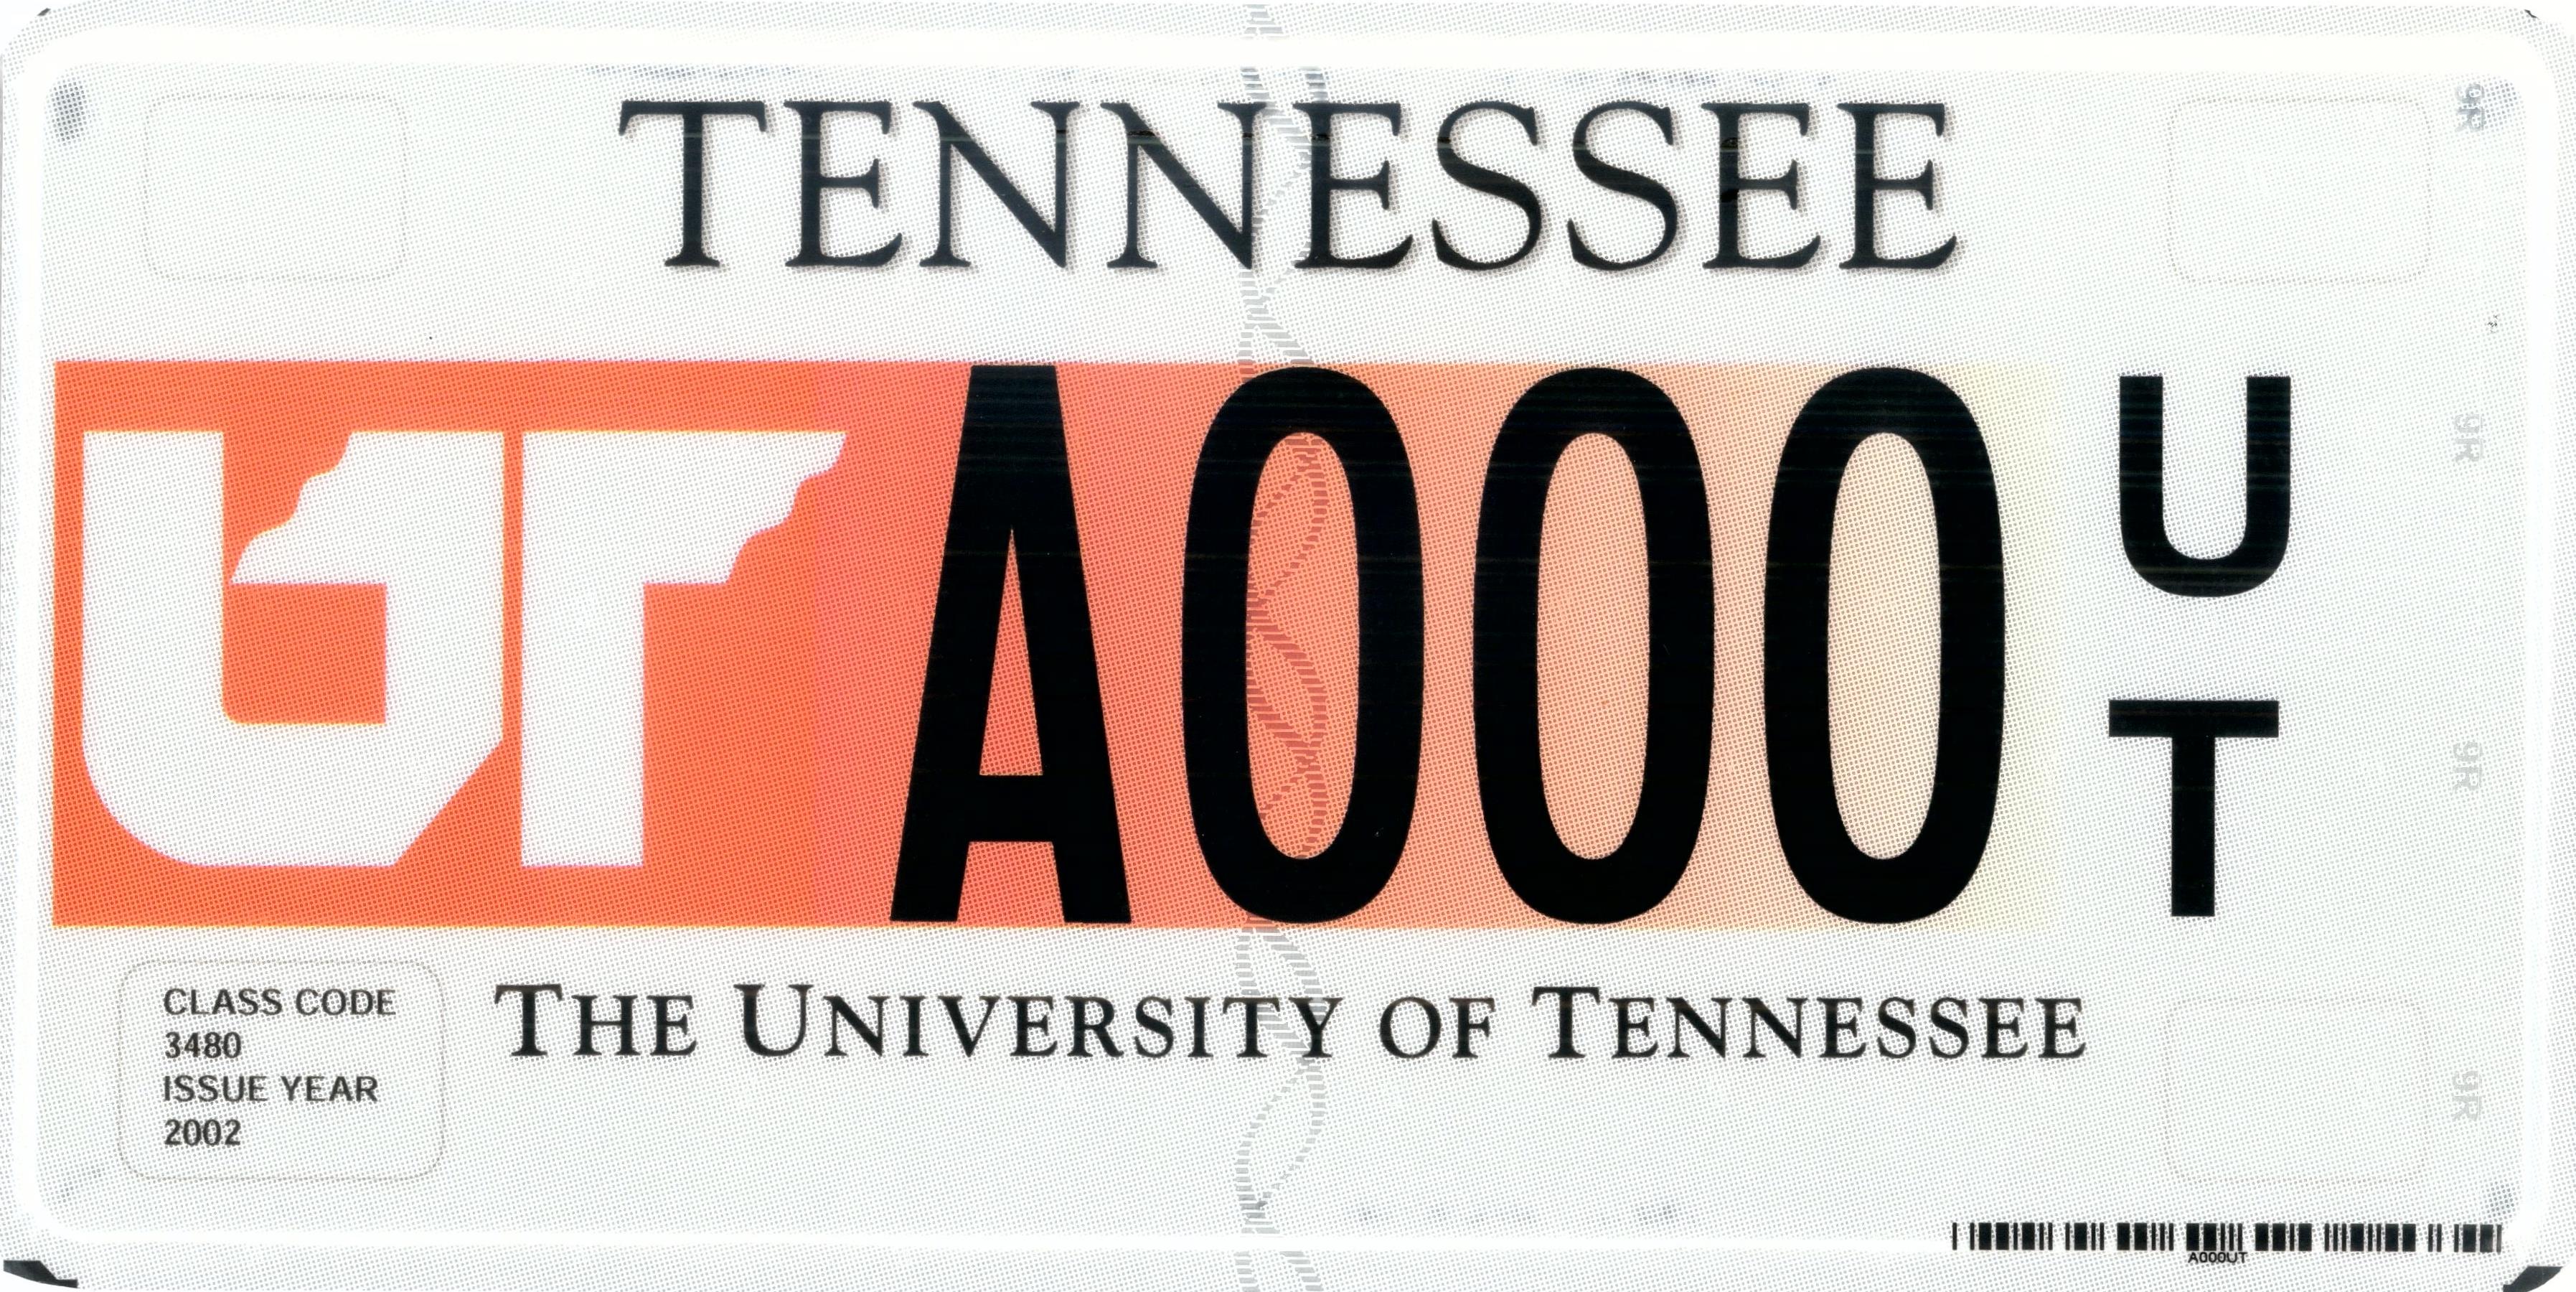 University_of_Tennessee_cls_3480.jpg